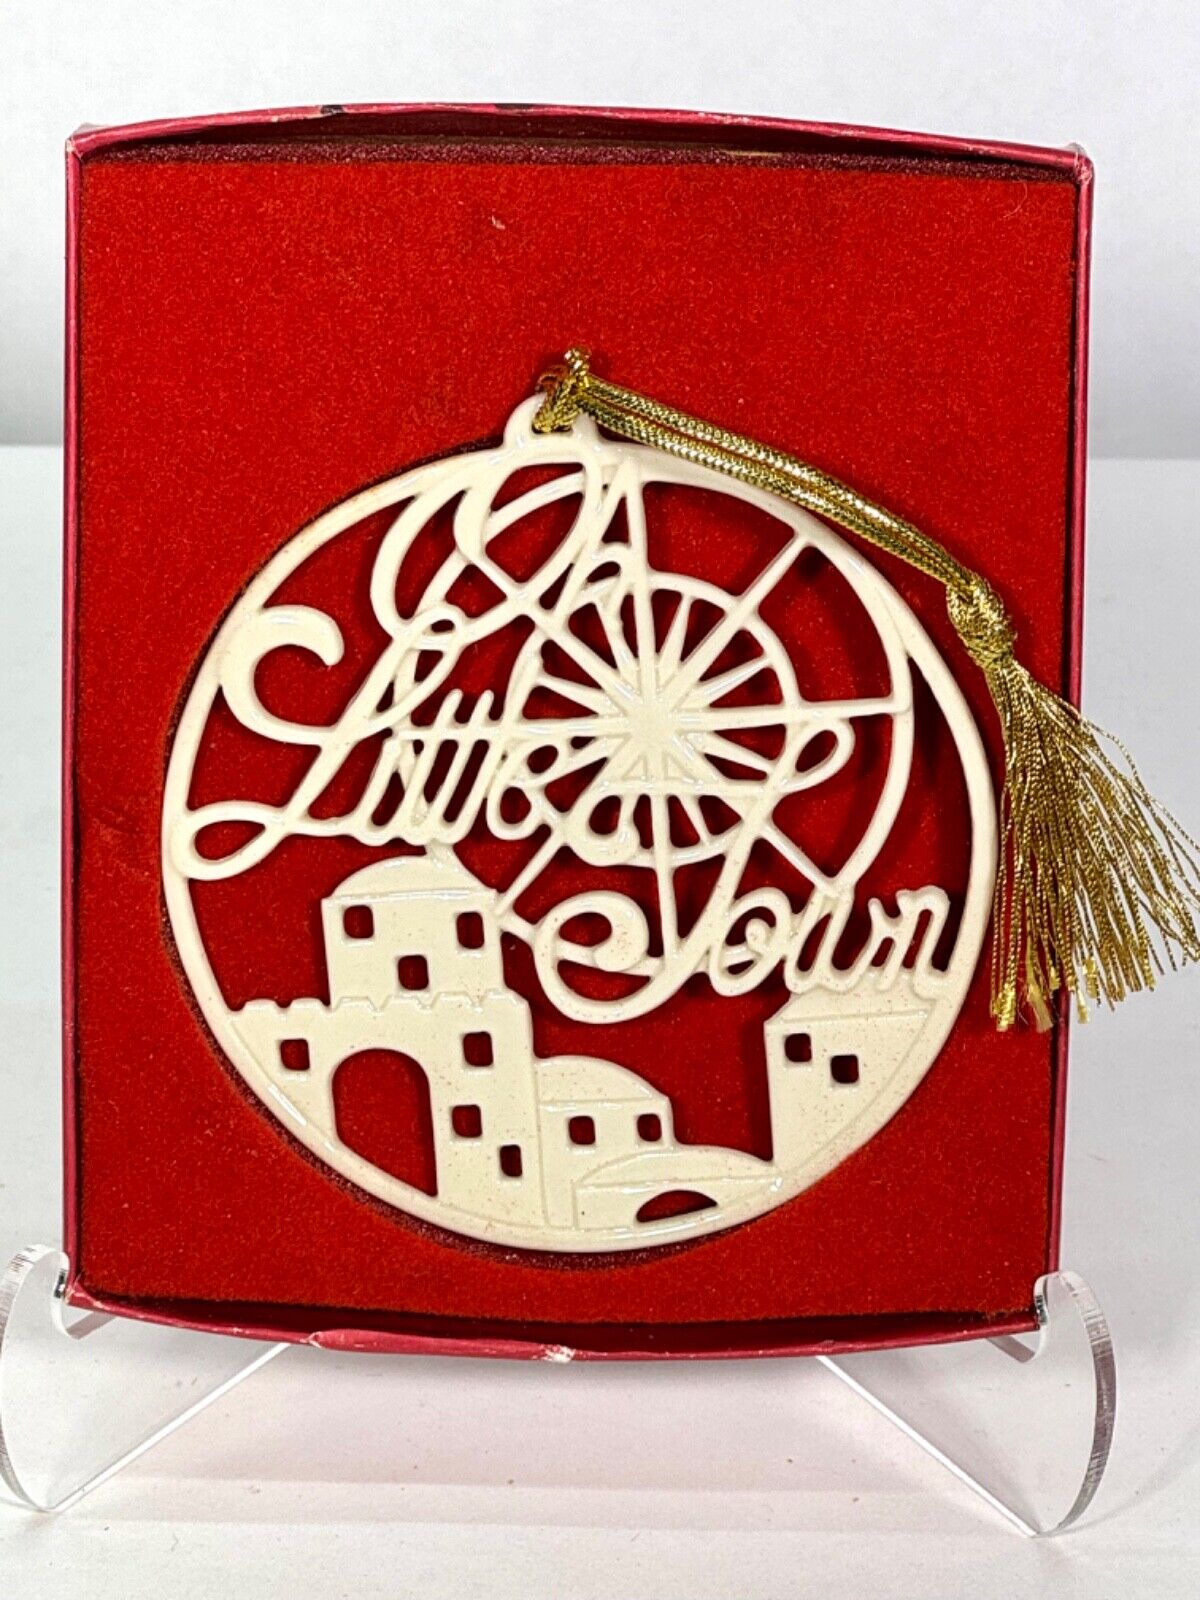 LENOX Oh Little Town of Bethlehem Songs of Christmas Ornament in Box VGC